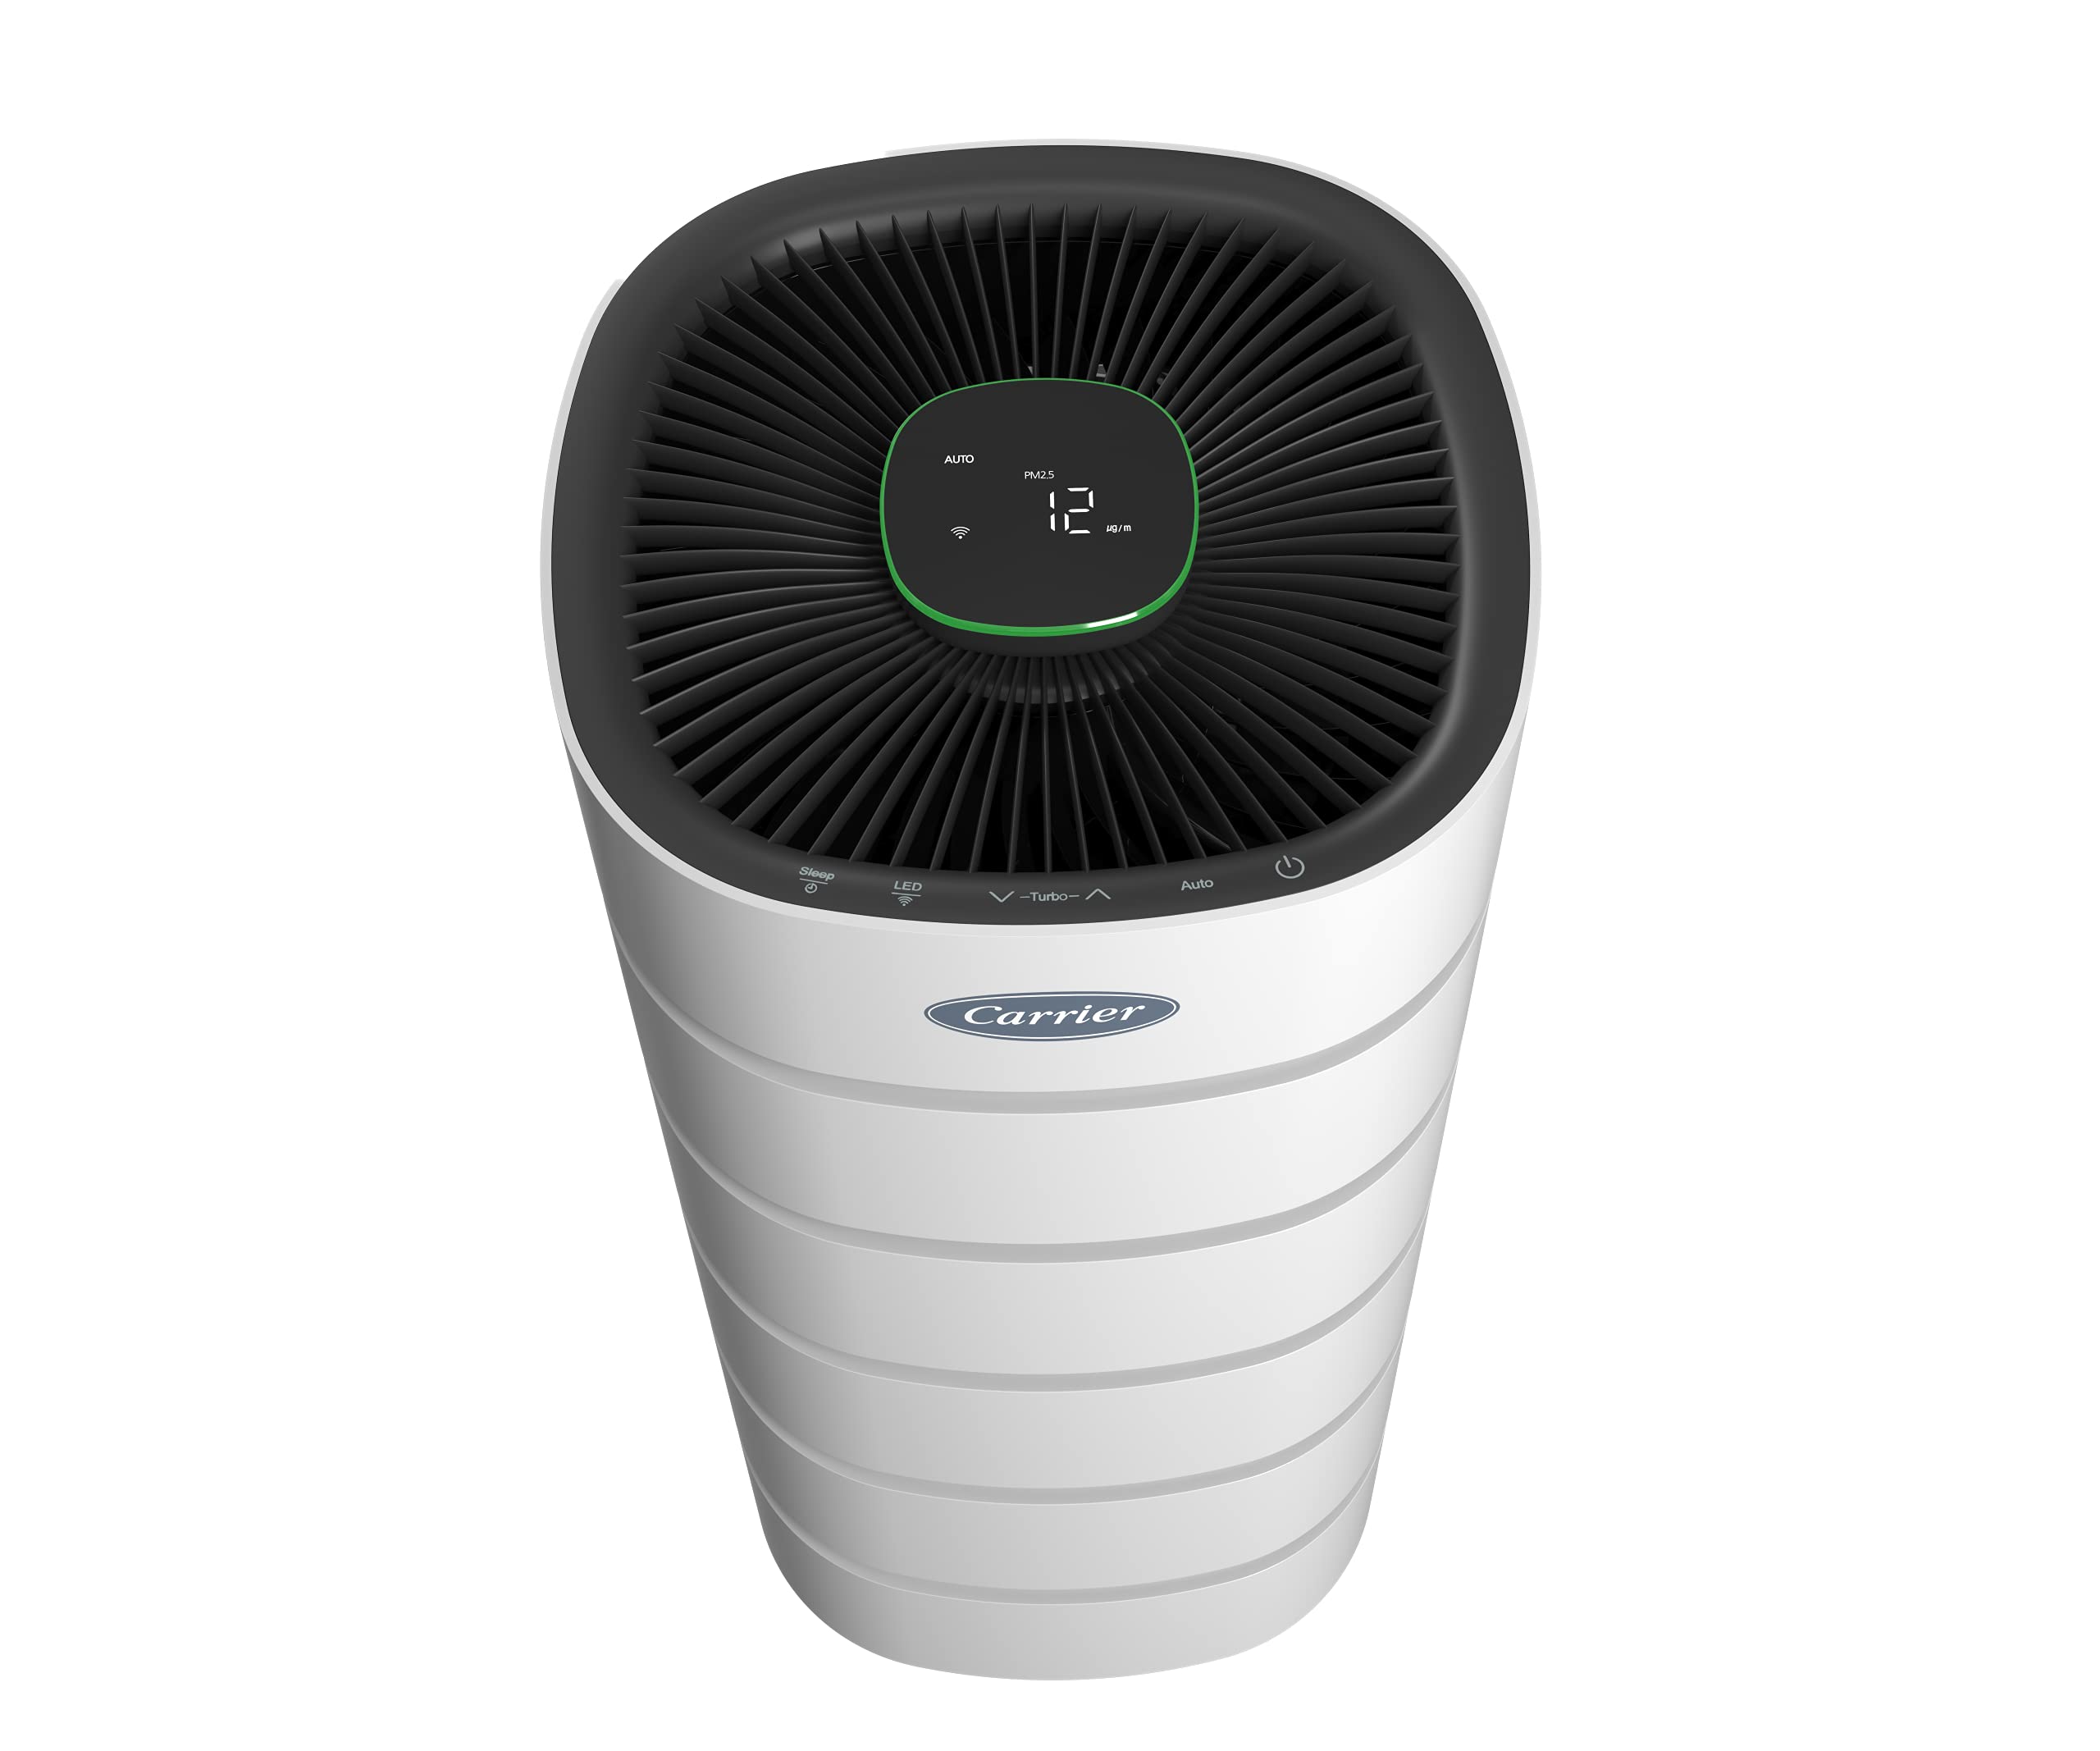 Carrier Smart Air Purifier Includes HEPA Filter and Air Quality Sensor, AHAM Verified for Rooms up to 560 Sq. Ft. with 360 Degree Filtration, White, 31.5 Inches (RMAP-SXL)